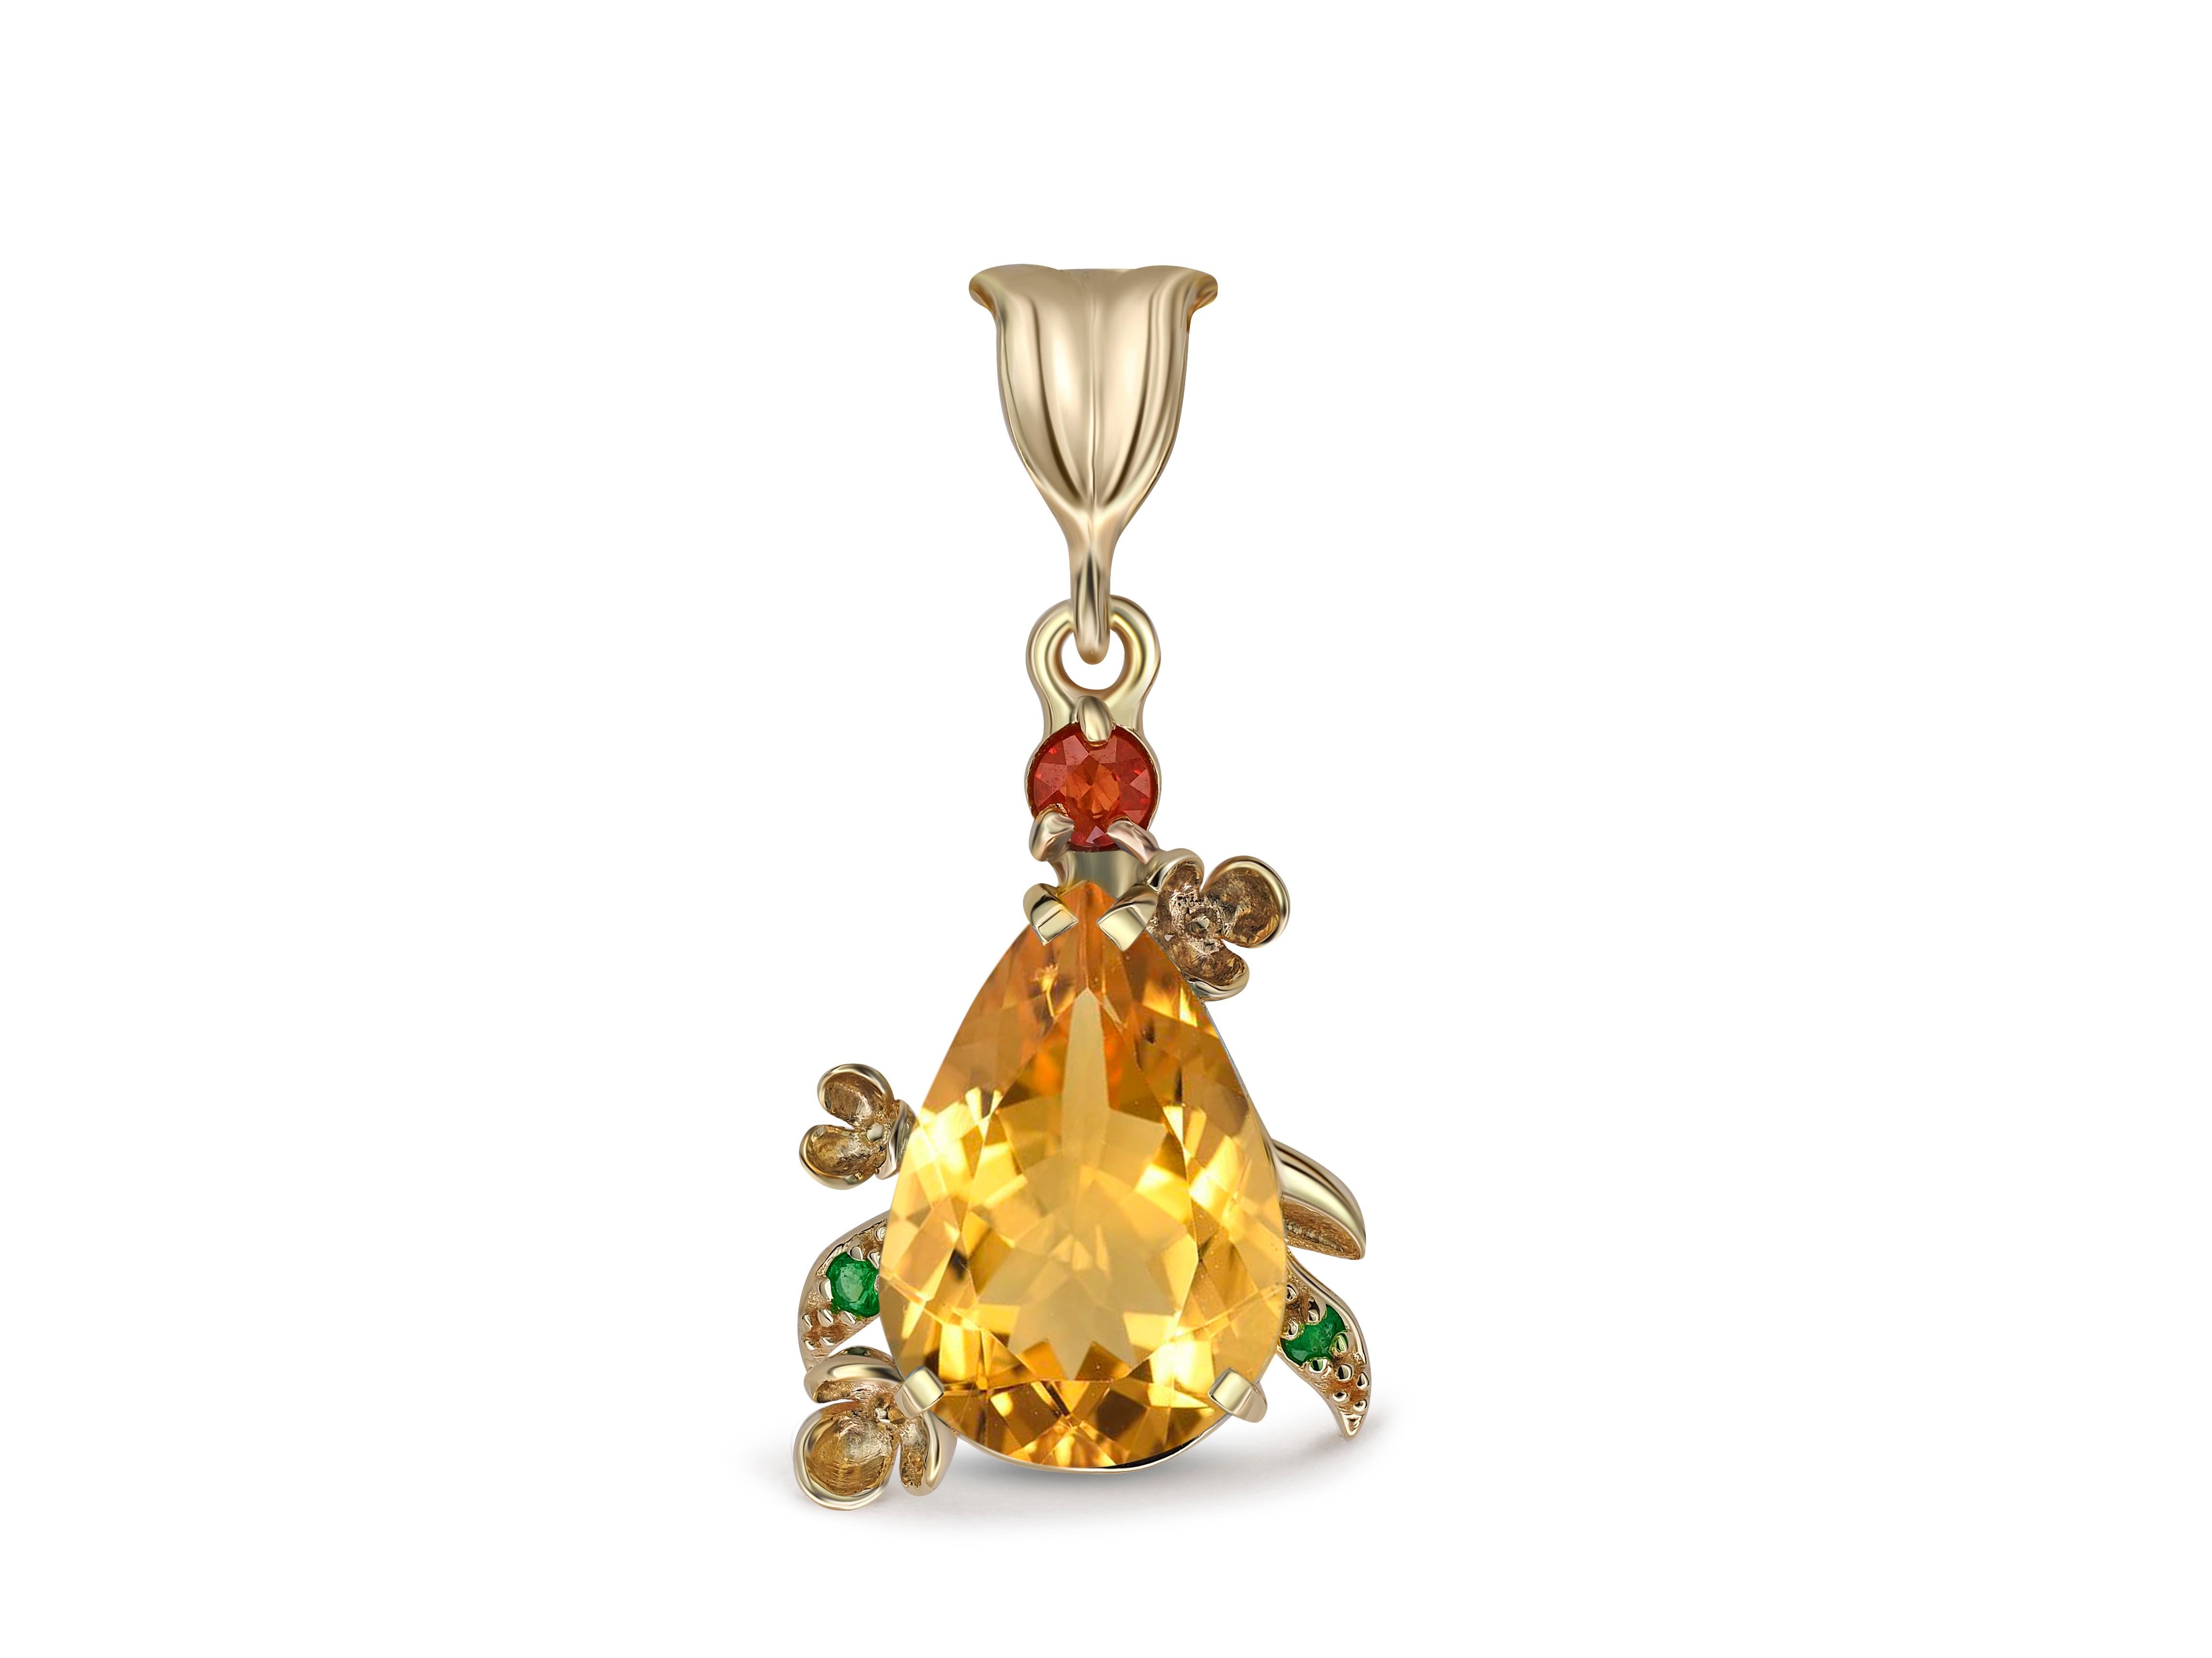 Pear citrine Pendant in 14 Karat Gold. 
Flower design pendant with natural citrine. Citrine gold pendant. November birthstone pendant.

Metal: 14k gold
Weight: 2.85 g.
Pendant size: 30x14.5 mm 

Set with citrine
Color - yellow
Pear cut, aprox 2.5